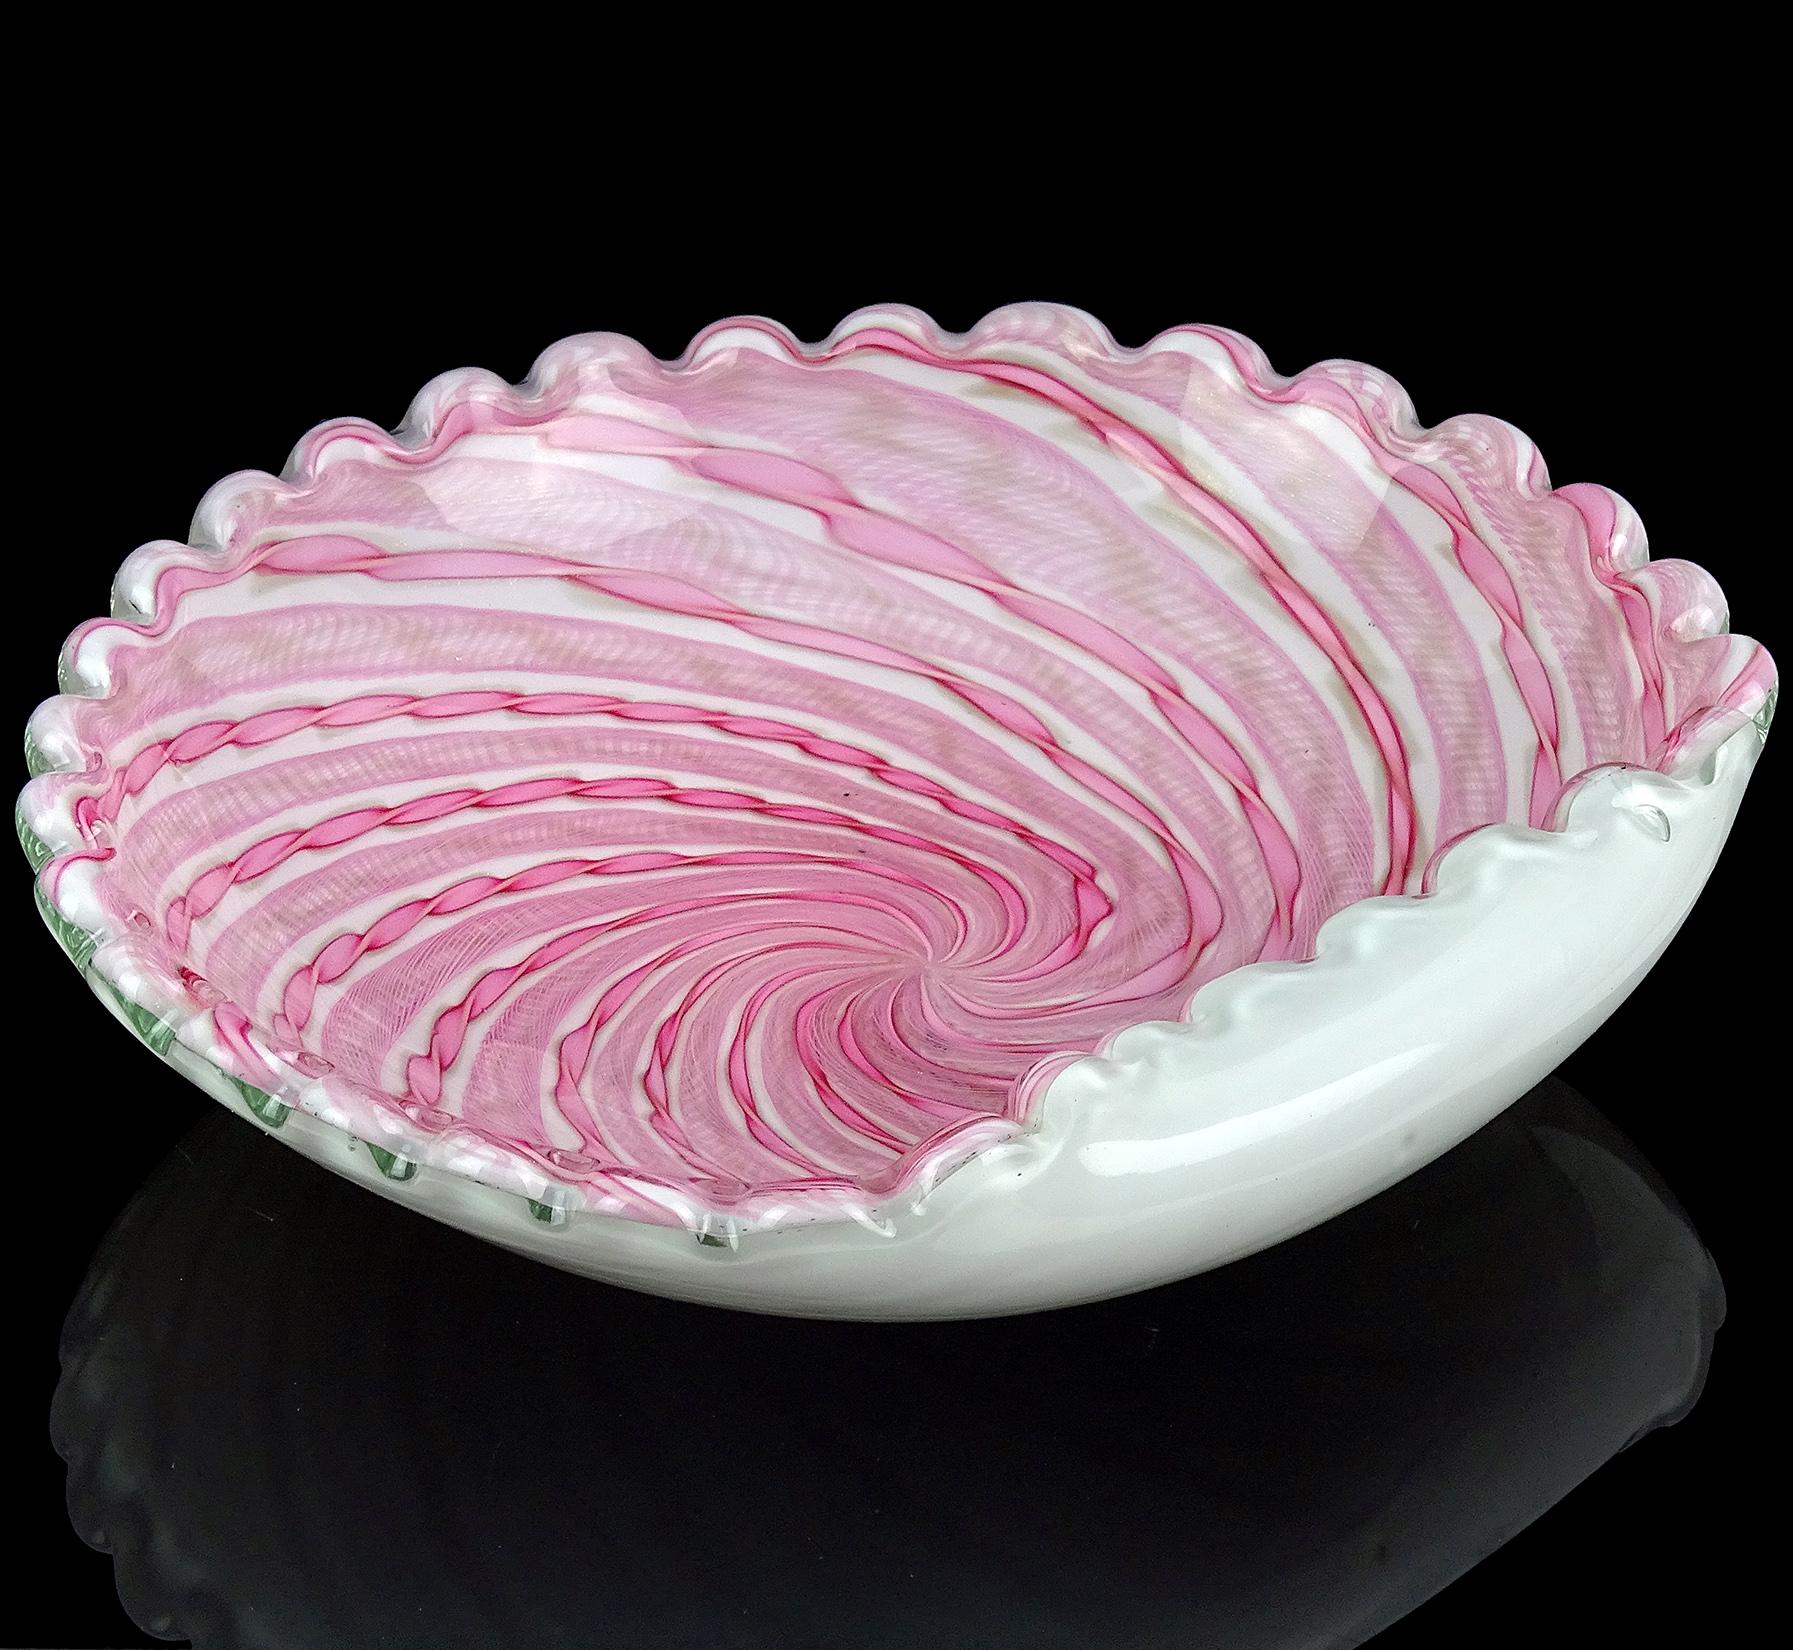 Hand-Crafted Fratelli Toso Murano Pink Aventurine Ribbons Italian Art Glass Centerpiece Bowl